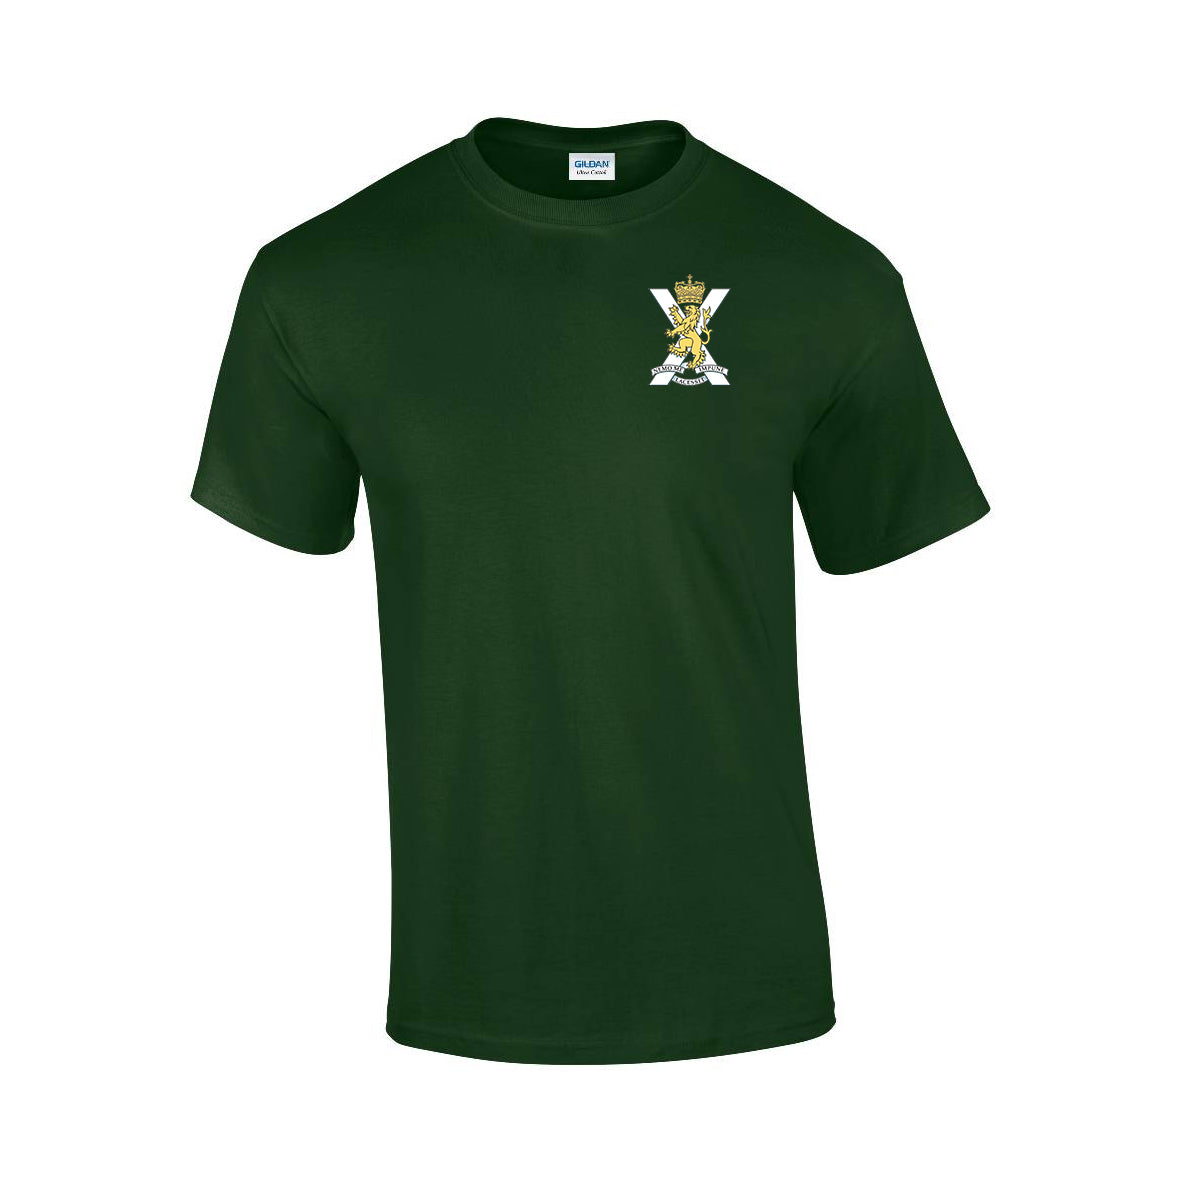 GD02 - Royal Regiment Of Scotland Premium Quality Embroidered T-Shirt - Bespoke Emerald Embroidery Ltd